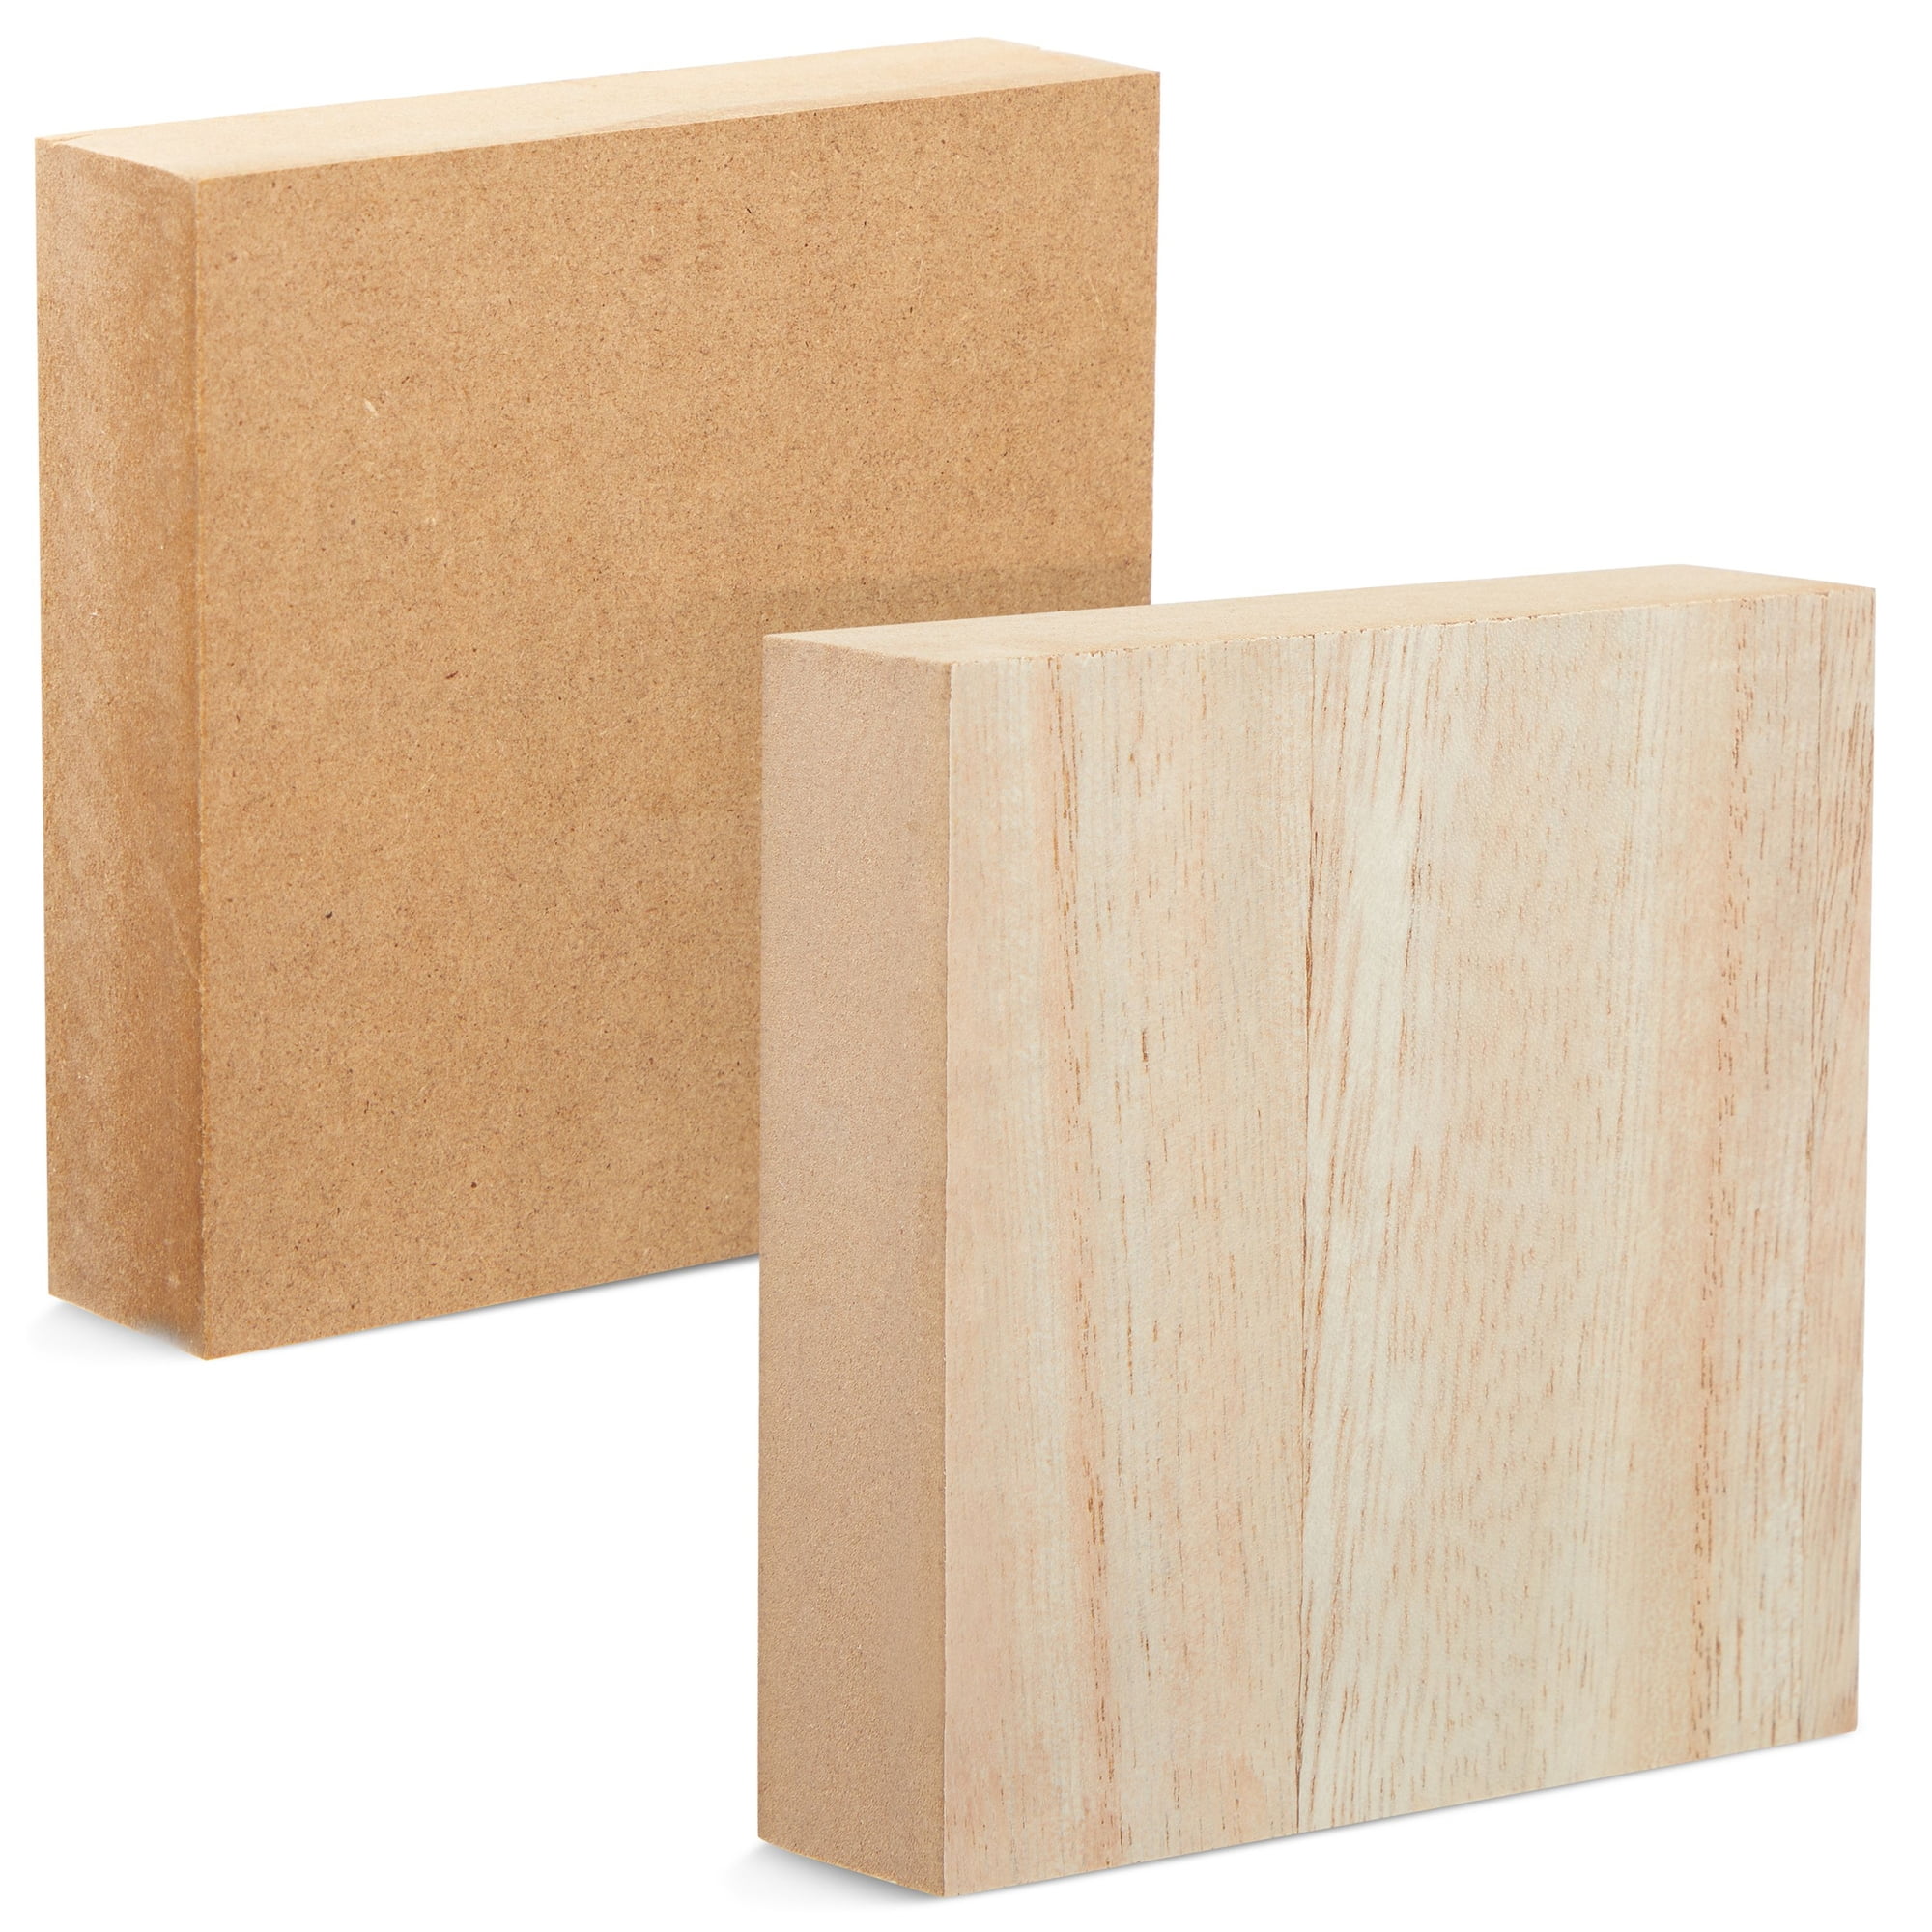 12 Pack Unfinished Birch Wood Blocks, 2 Inch Natural Wooden Cubes with  Smooth Surface for Painting, Arts, Crafts, and Other DIY Projects - by